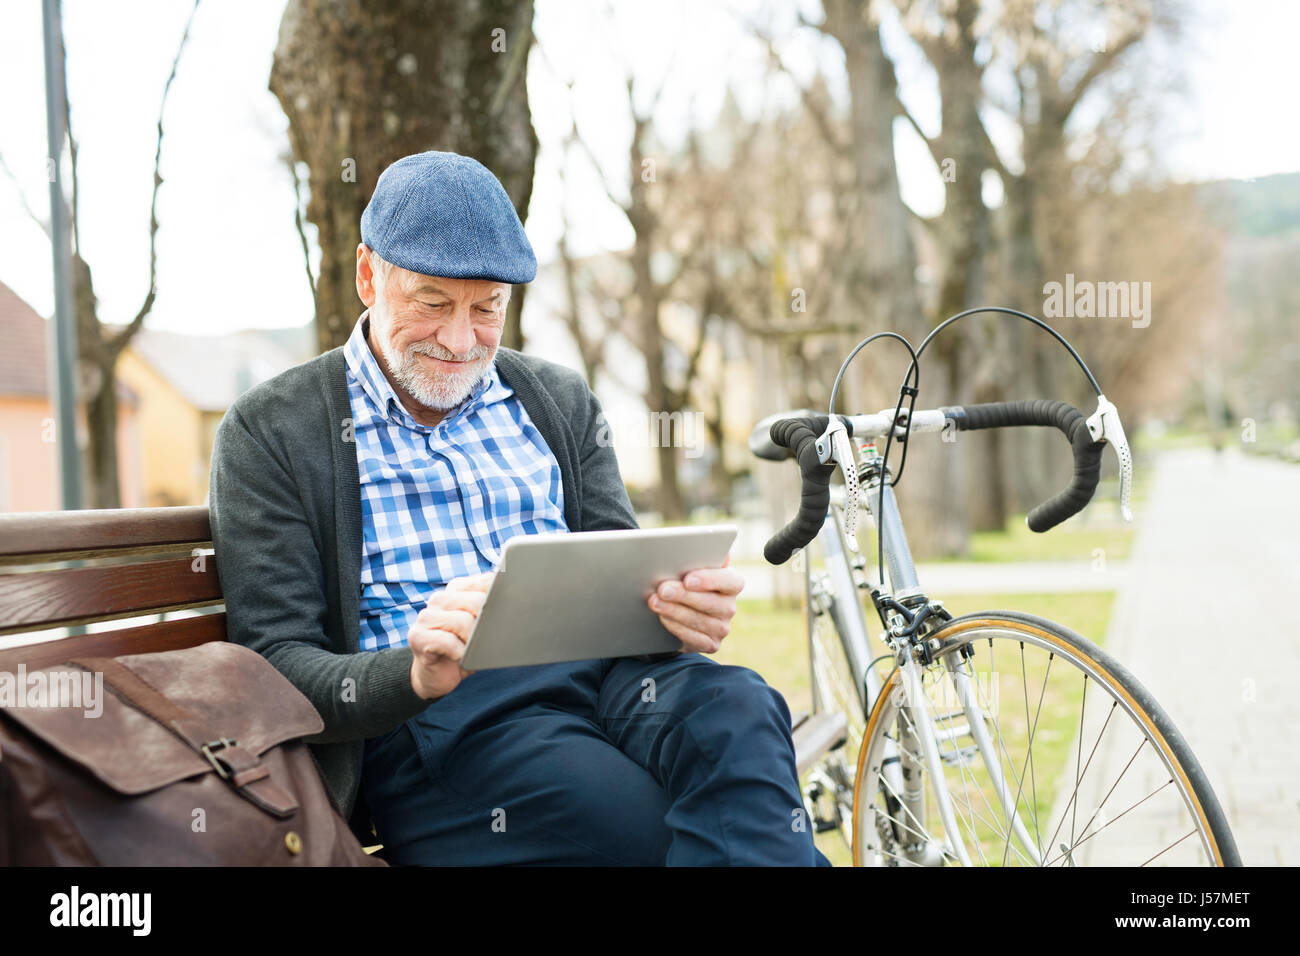 Senior man in town sitting on bench, working on tablet Stock Photo